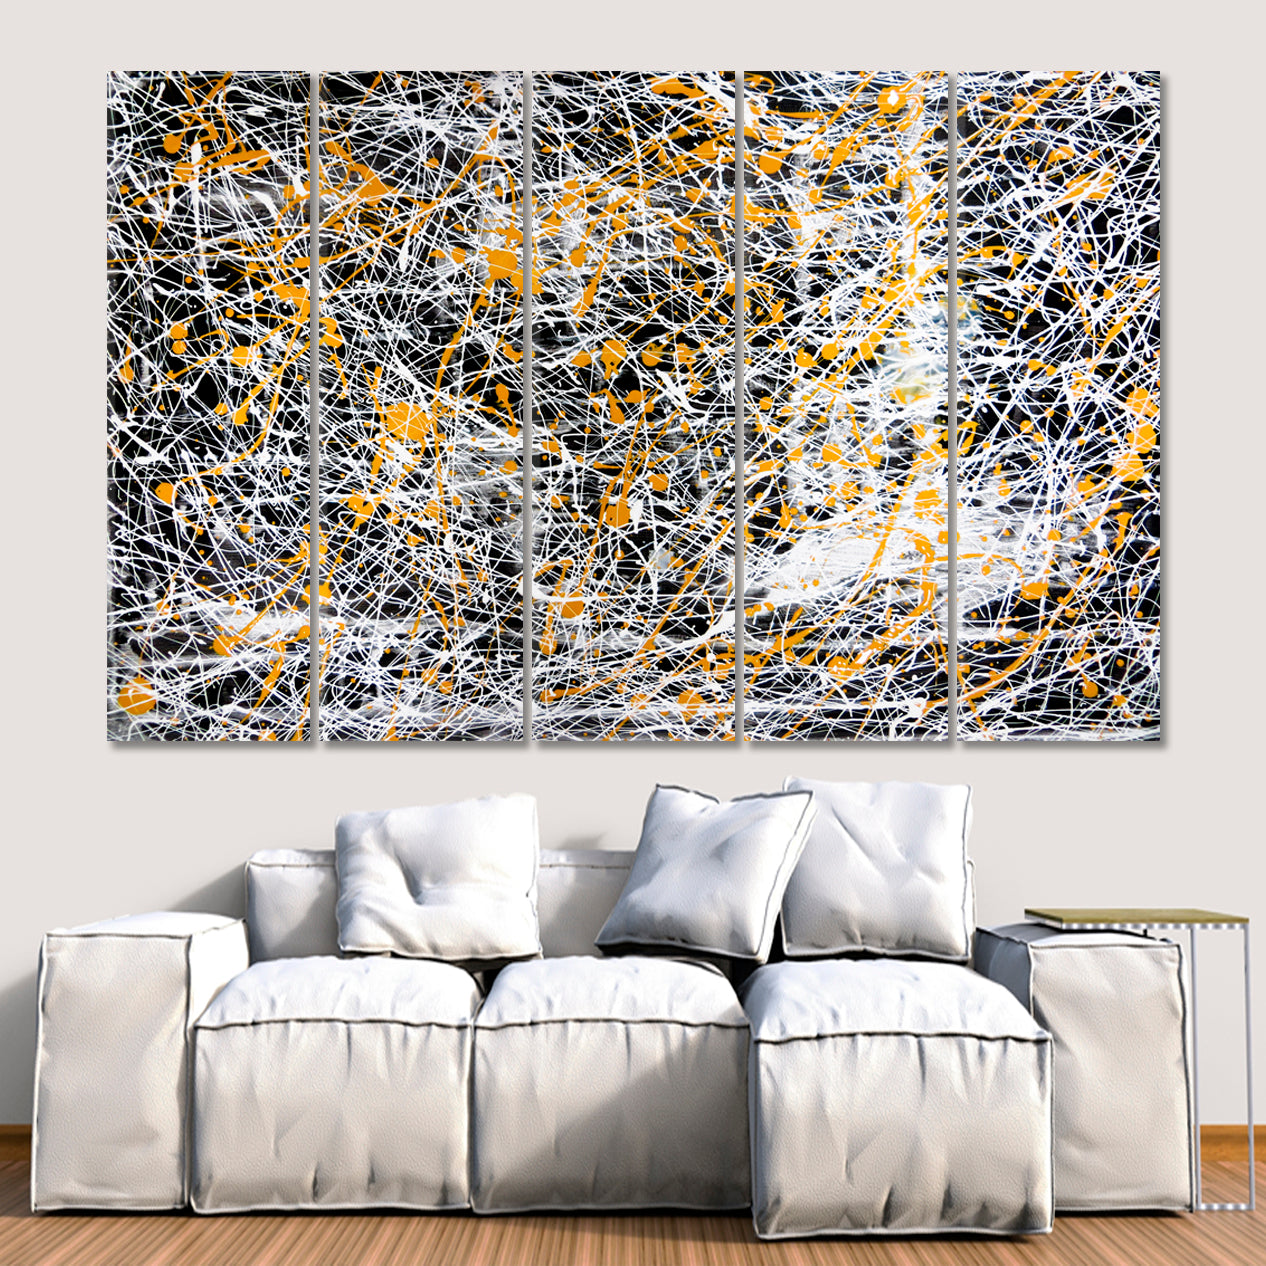 Abstract Drip White Black Yellow Modern Expressionist Contemporary Art Artesty 5 panels 36" x 24" 